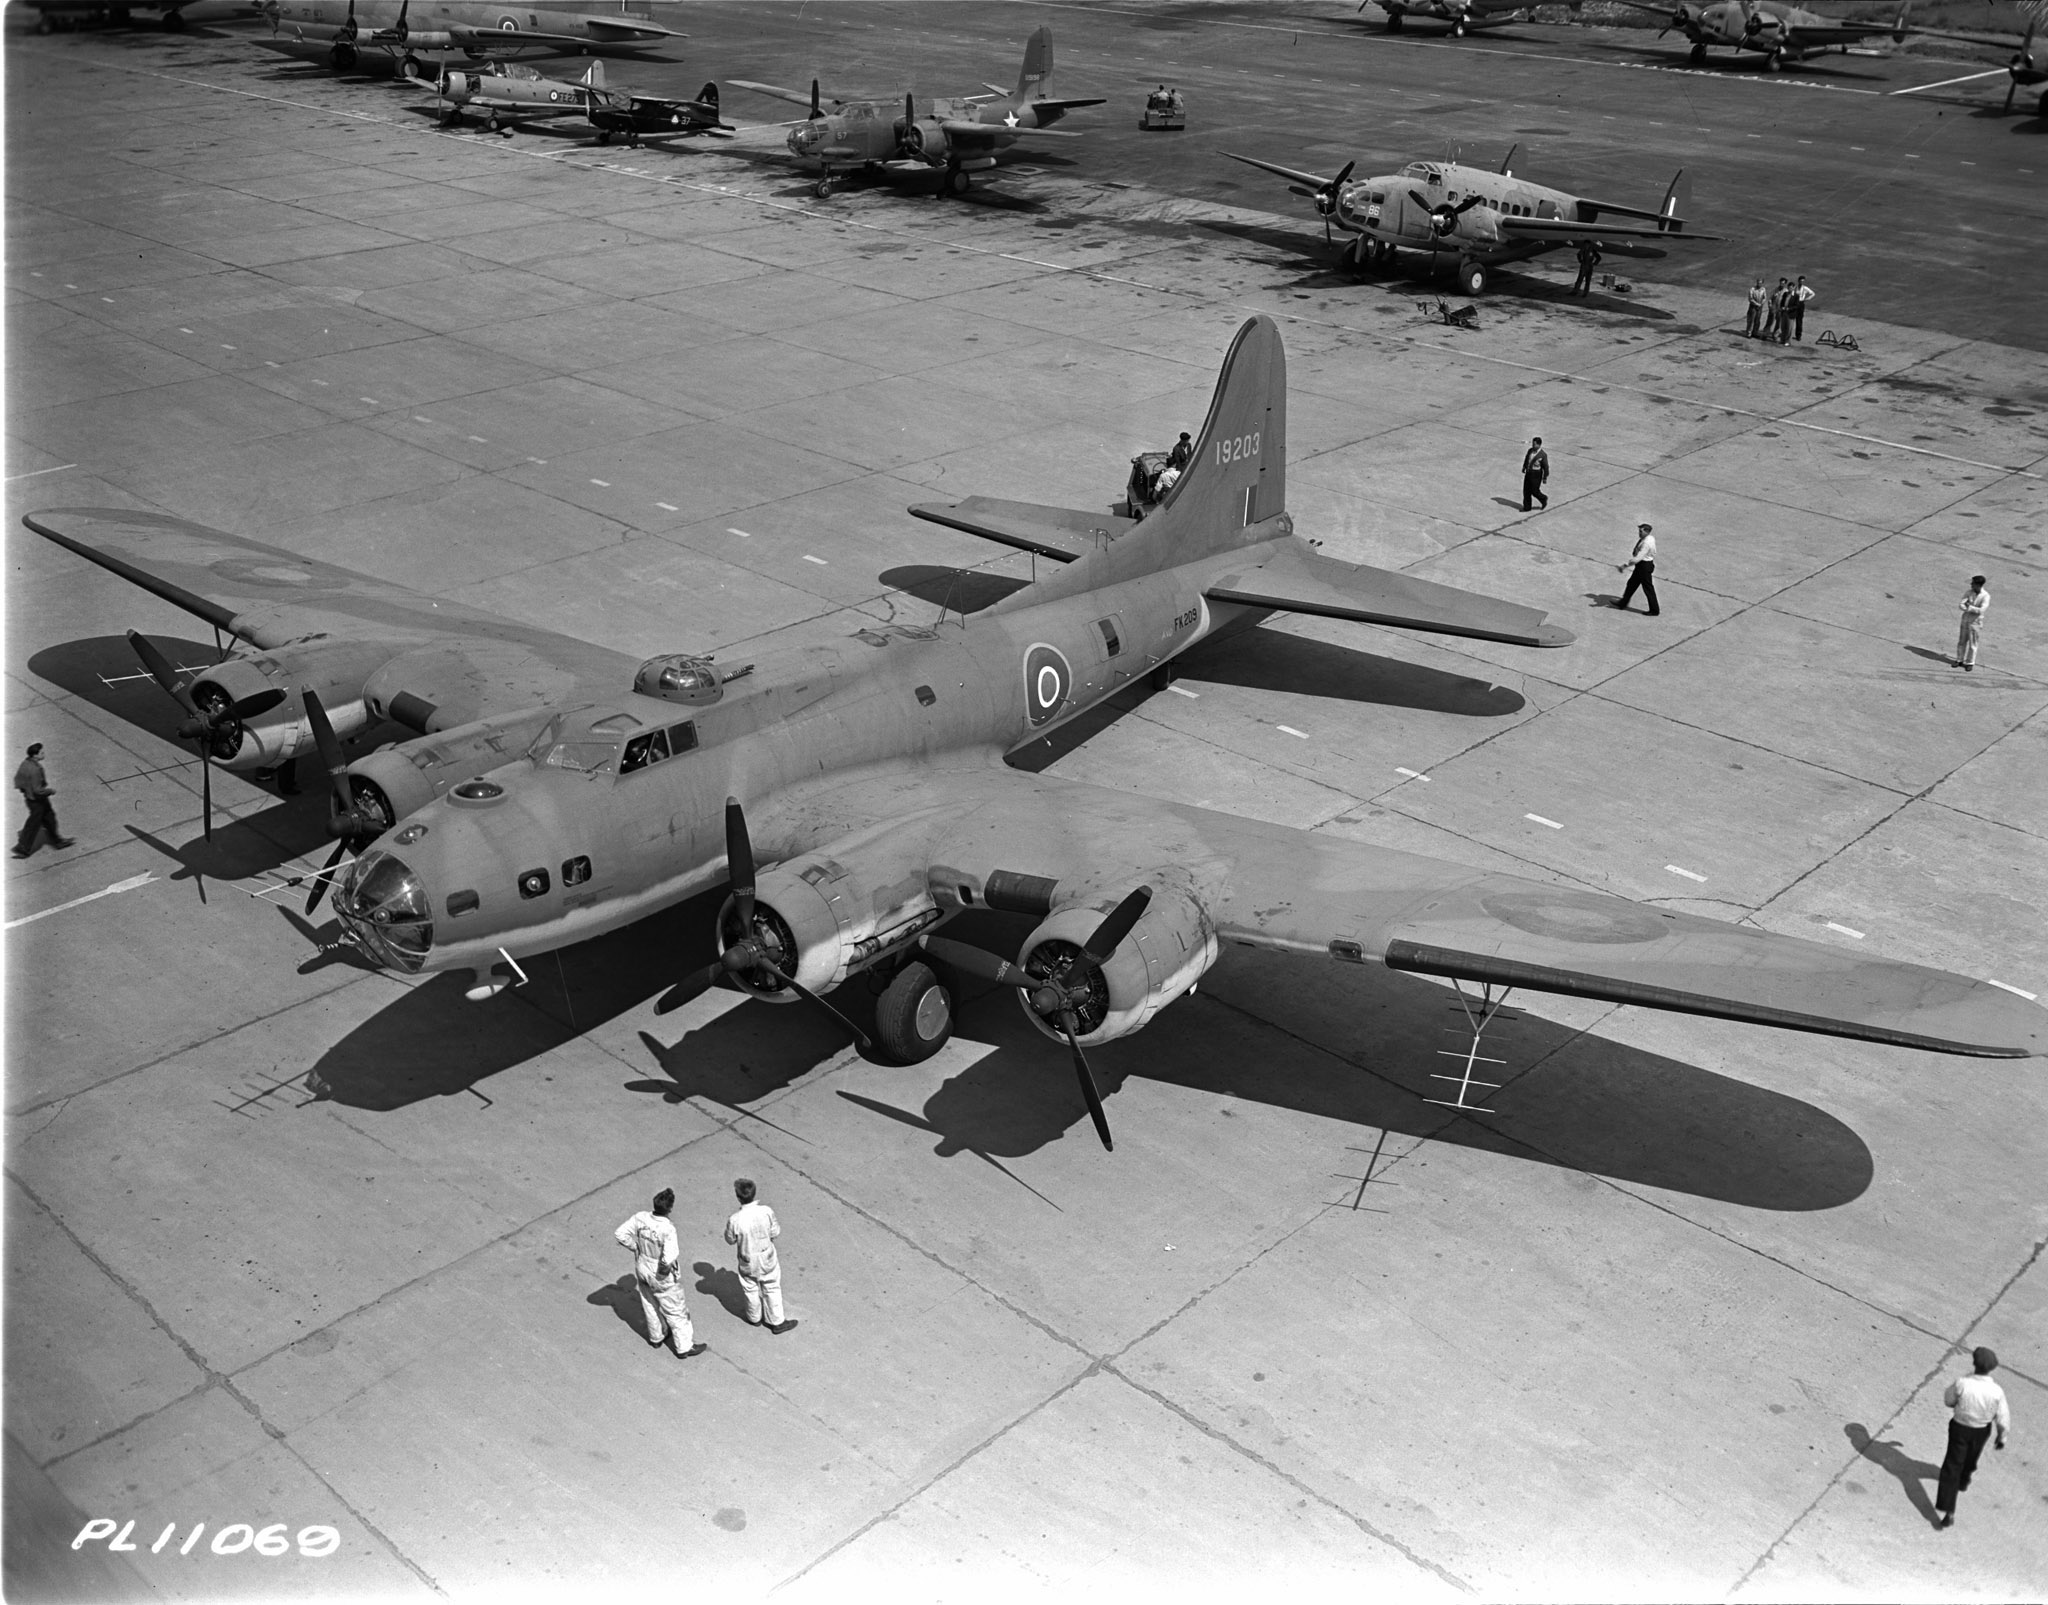 A Boeing B-17 Flying Fortress at Dorval Airport. PHOTO: DND Archives, PL-11069